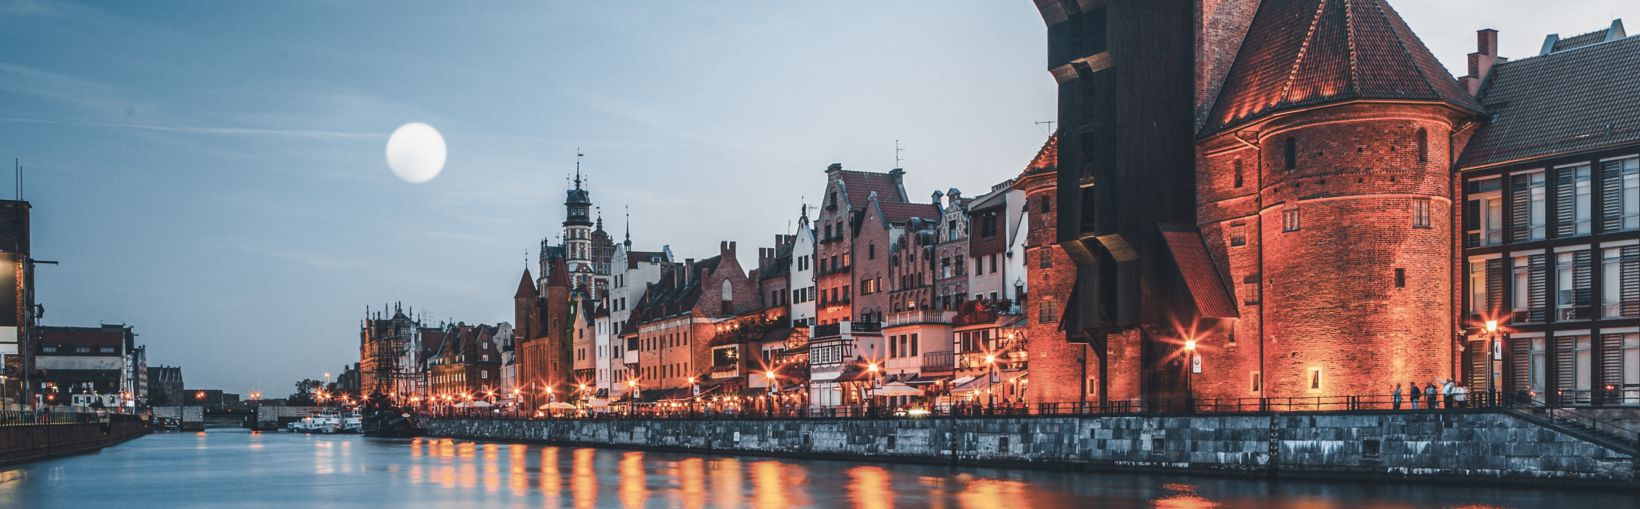 The harbour waterfront of the old town of Gdansk with traditional buildings dimly lit up at dusk.